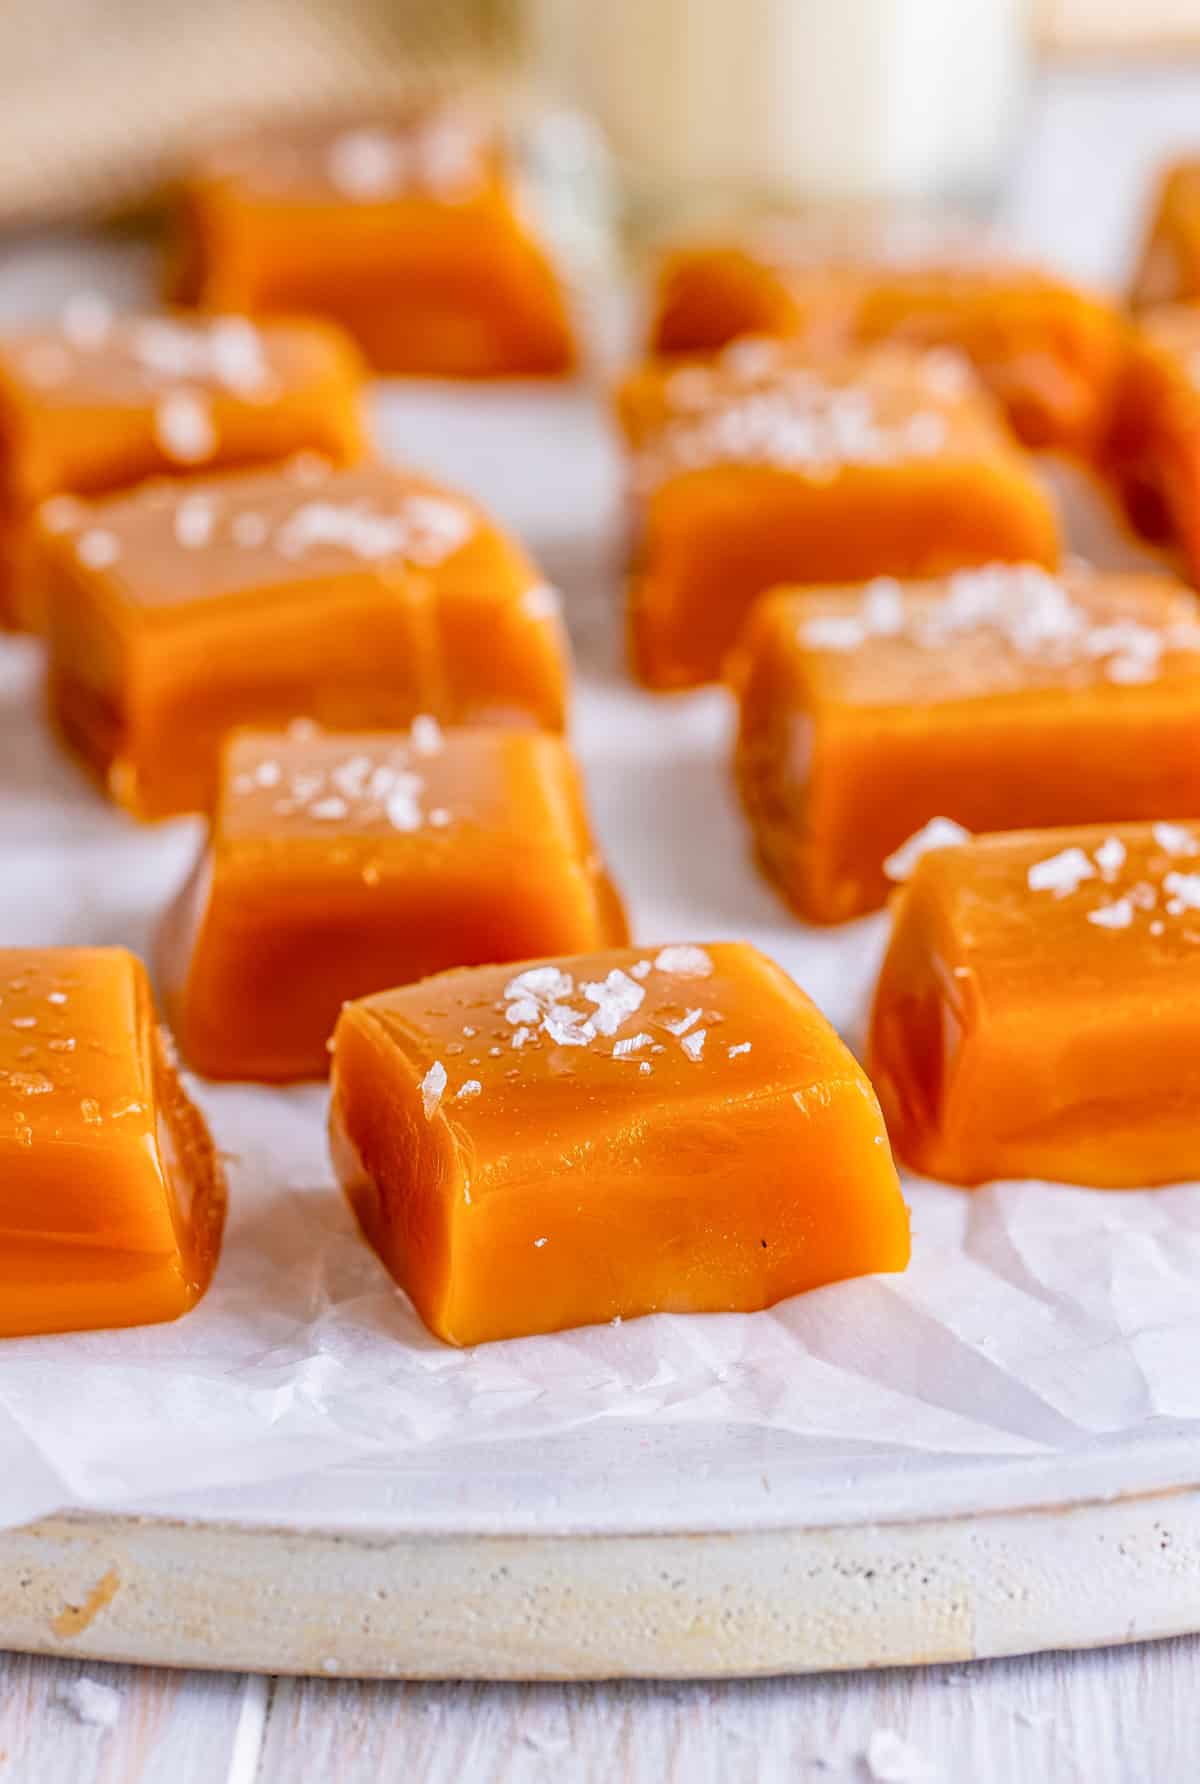 Cut and salted Homemade Caramels on parchment paper.